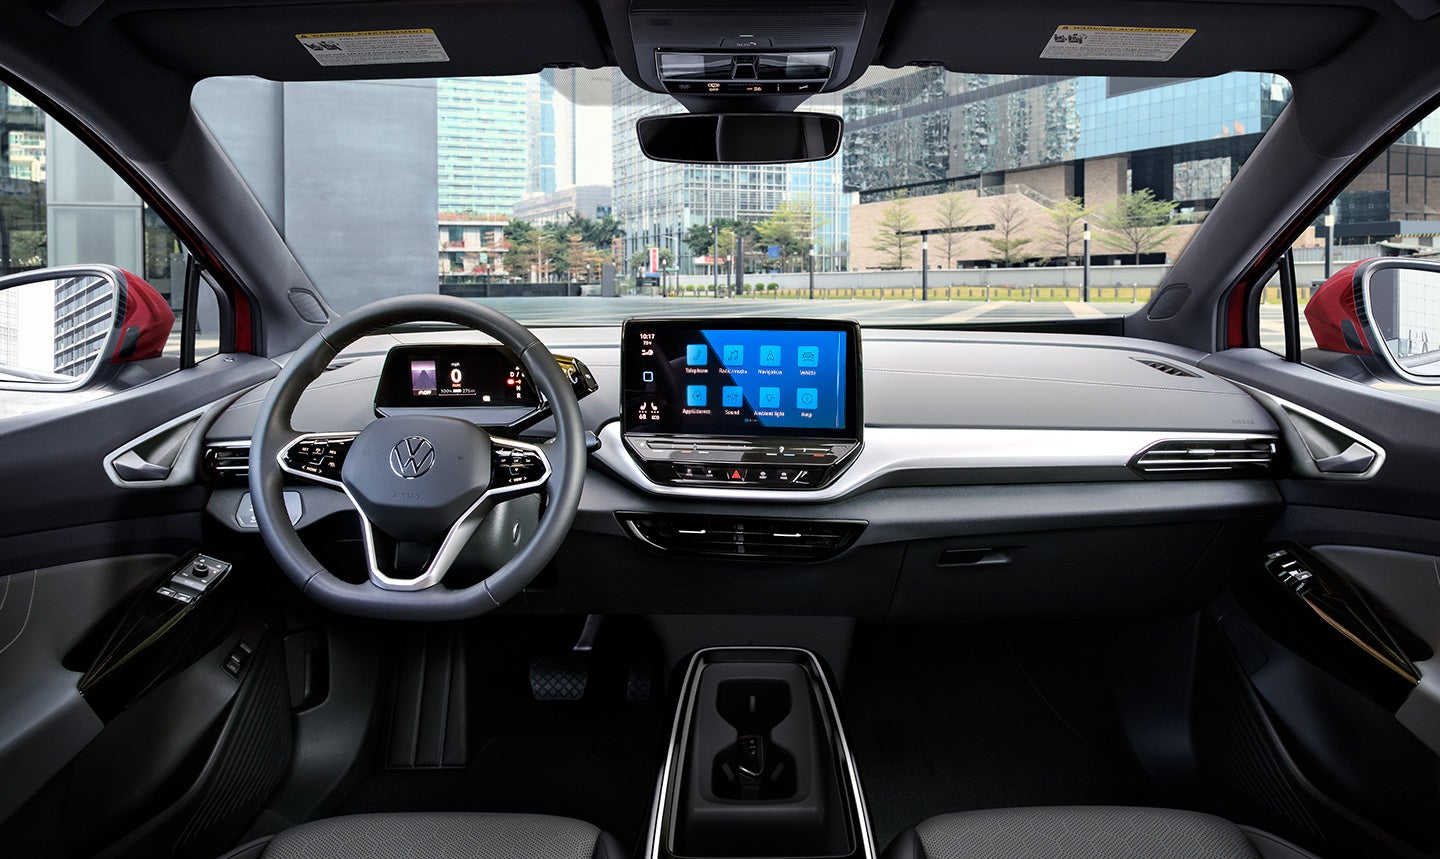 An interior shot of the ID.4 cockpit area featuring the Galaxy interior, steering wheel, driver display, and center console. Parked downtown, a modern city can be seen through the windshield.